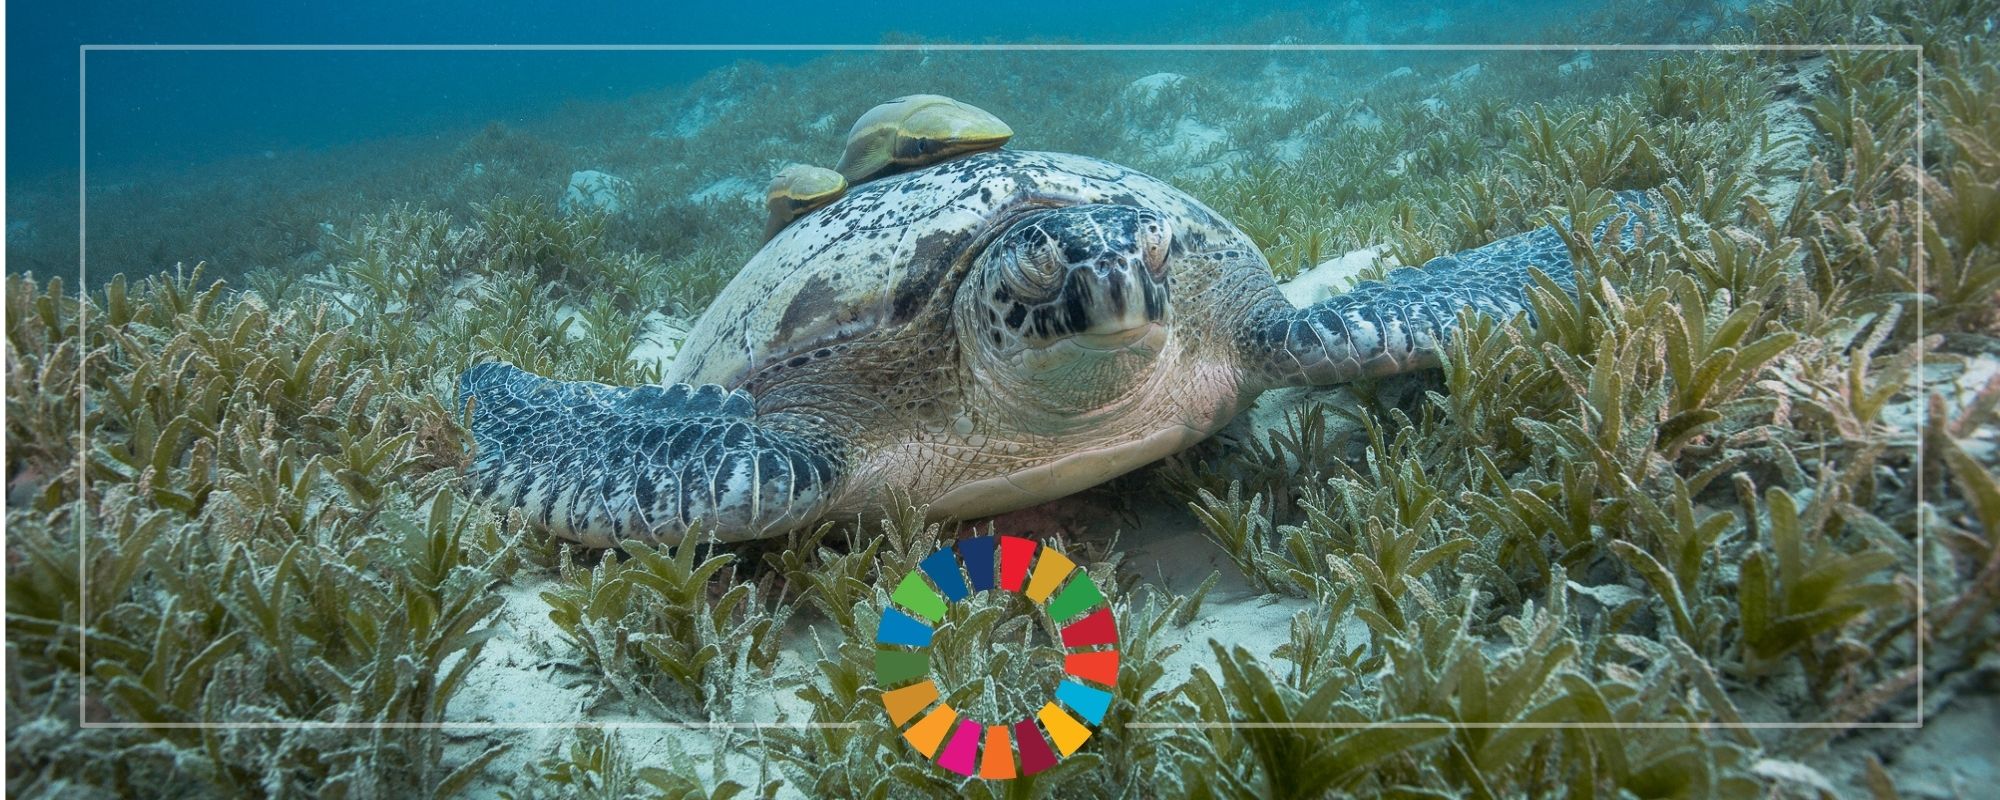 By aligning with the SDGs, we turn the invisible into the visible